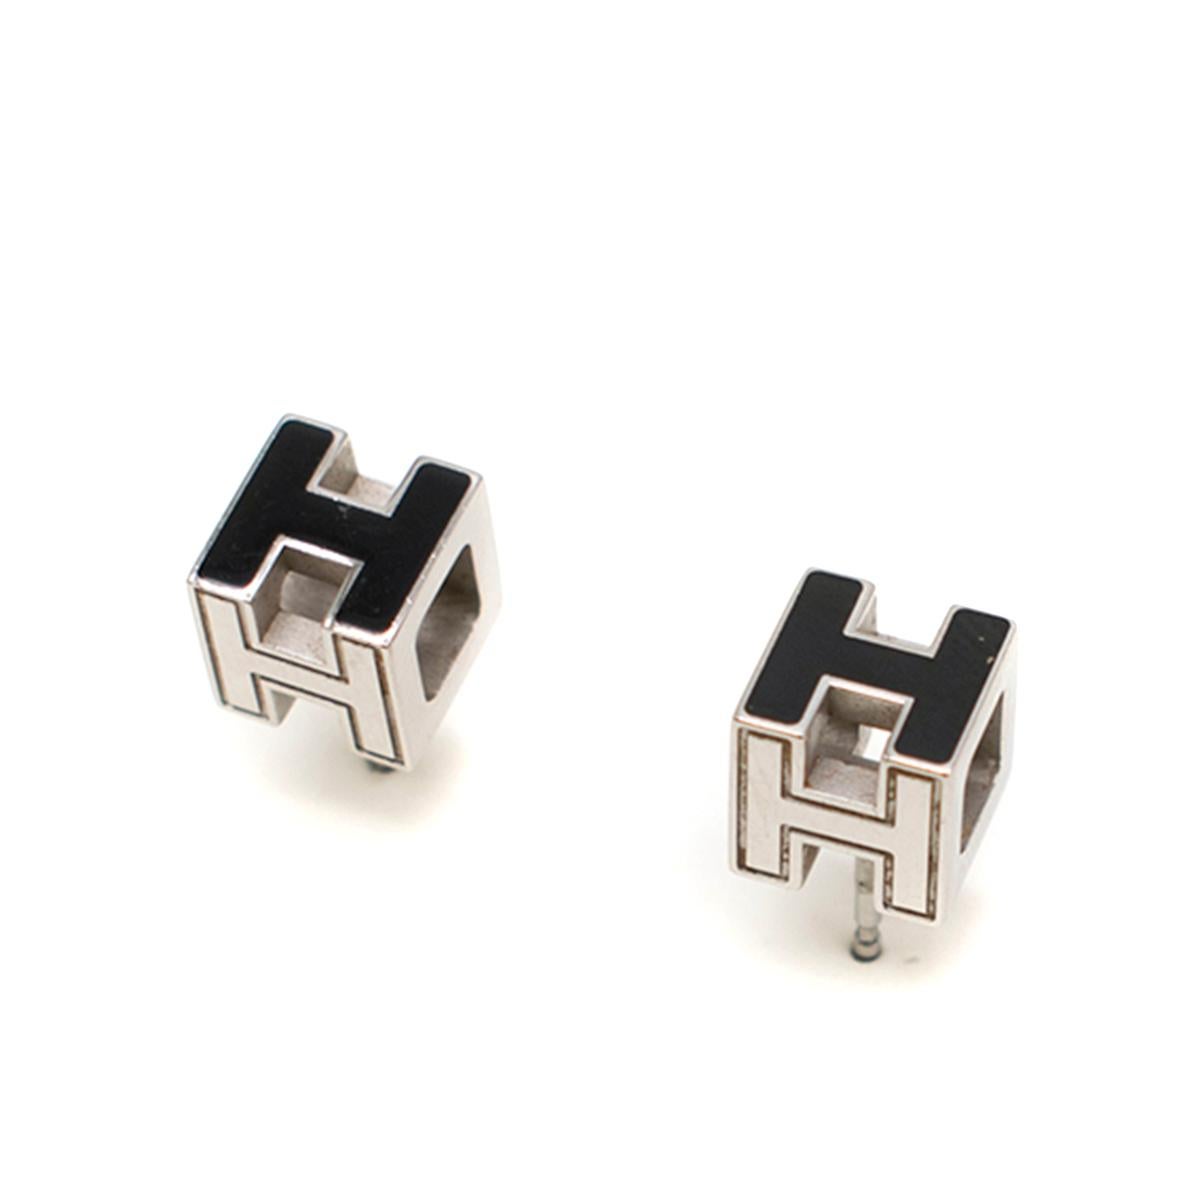 Hermes Black Cage d'H Earrings

- Black stud earrings 
- Cubical Cage-shaped with H
- Silver plated Palladium base 
- Black enamel detail 
- Stopper carried hermes insignia and features engraved logo

This item comes with an additional dust bag and